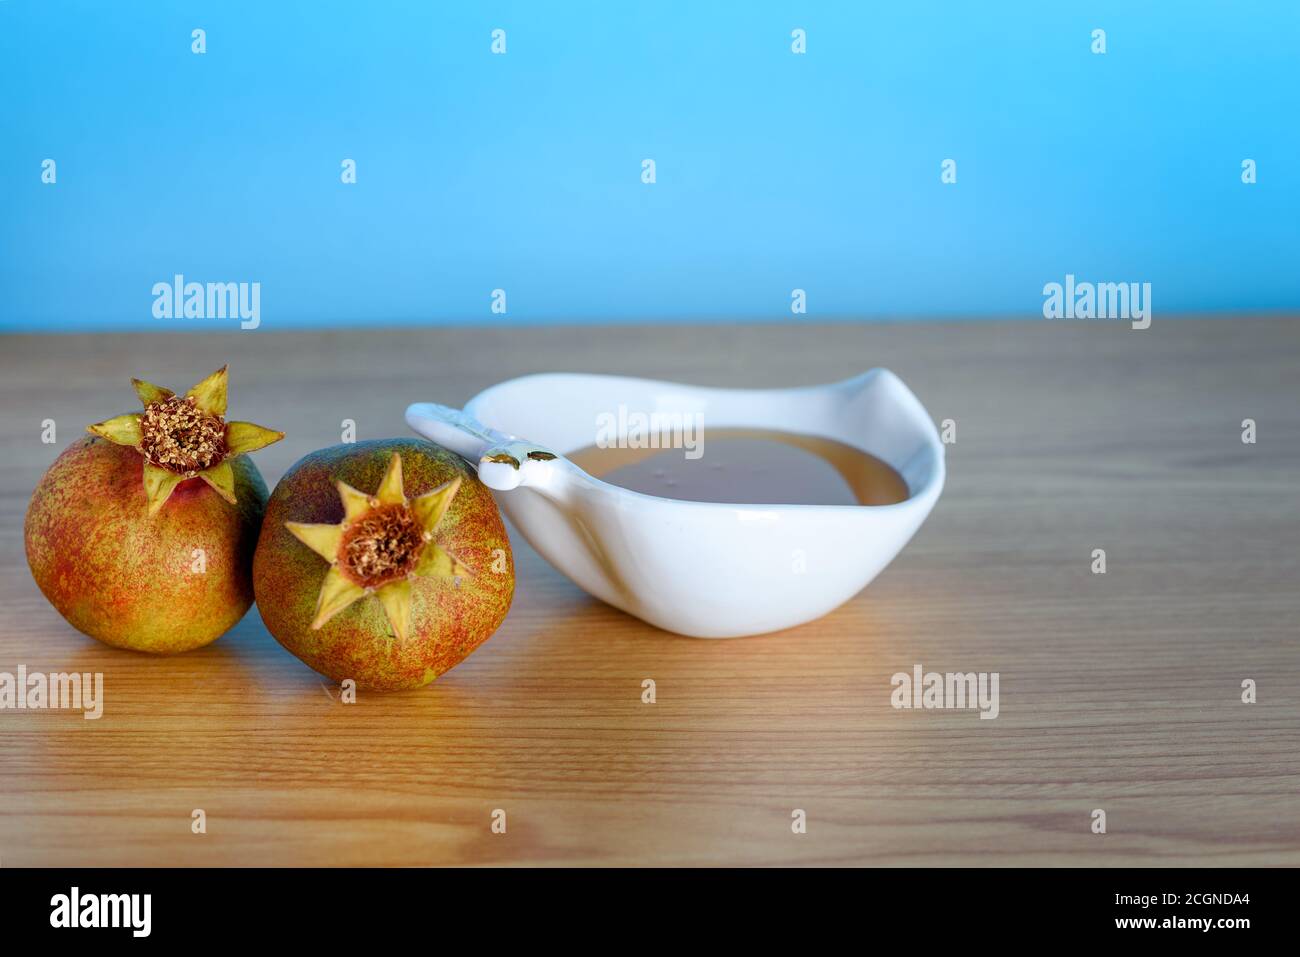 Rosh Ha Shana - Jewish new year composition of pomegranate and white bowl of honey for Rosh Hashanah on wooden table over blue background.Greeting card with copy space. Stock Photo